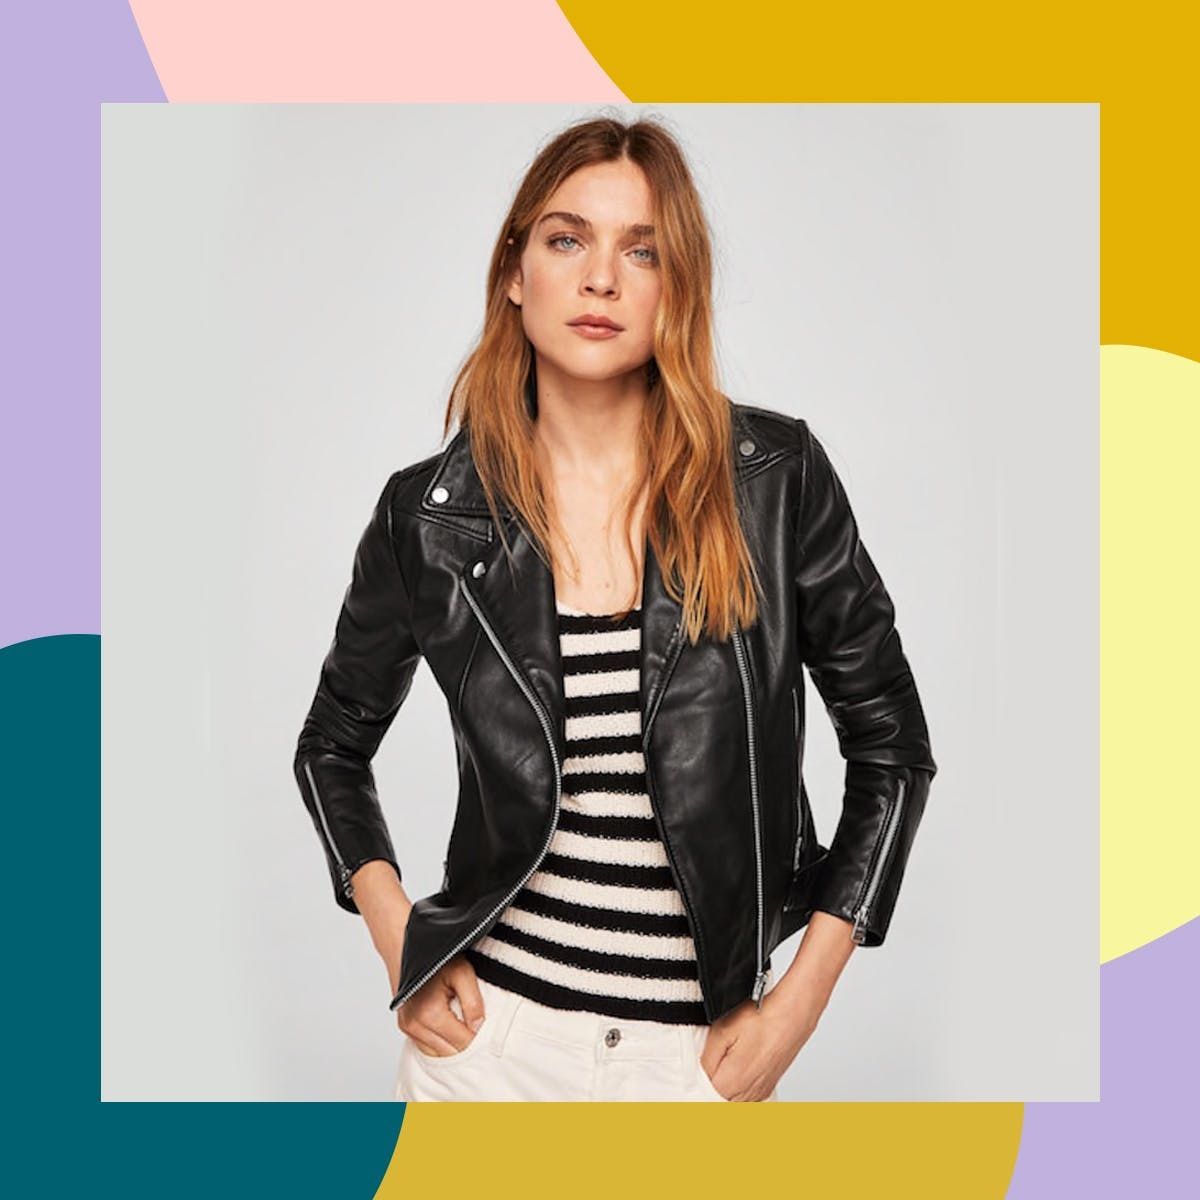 Badass Black Leather Jackets for Every Budget